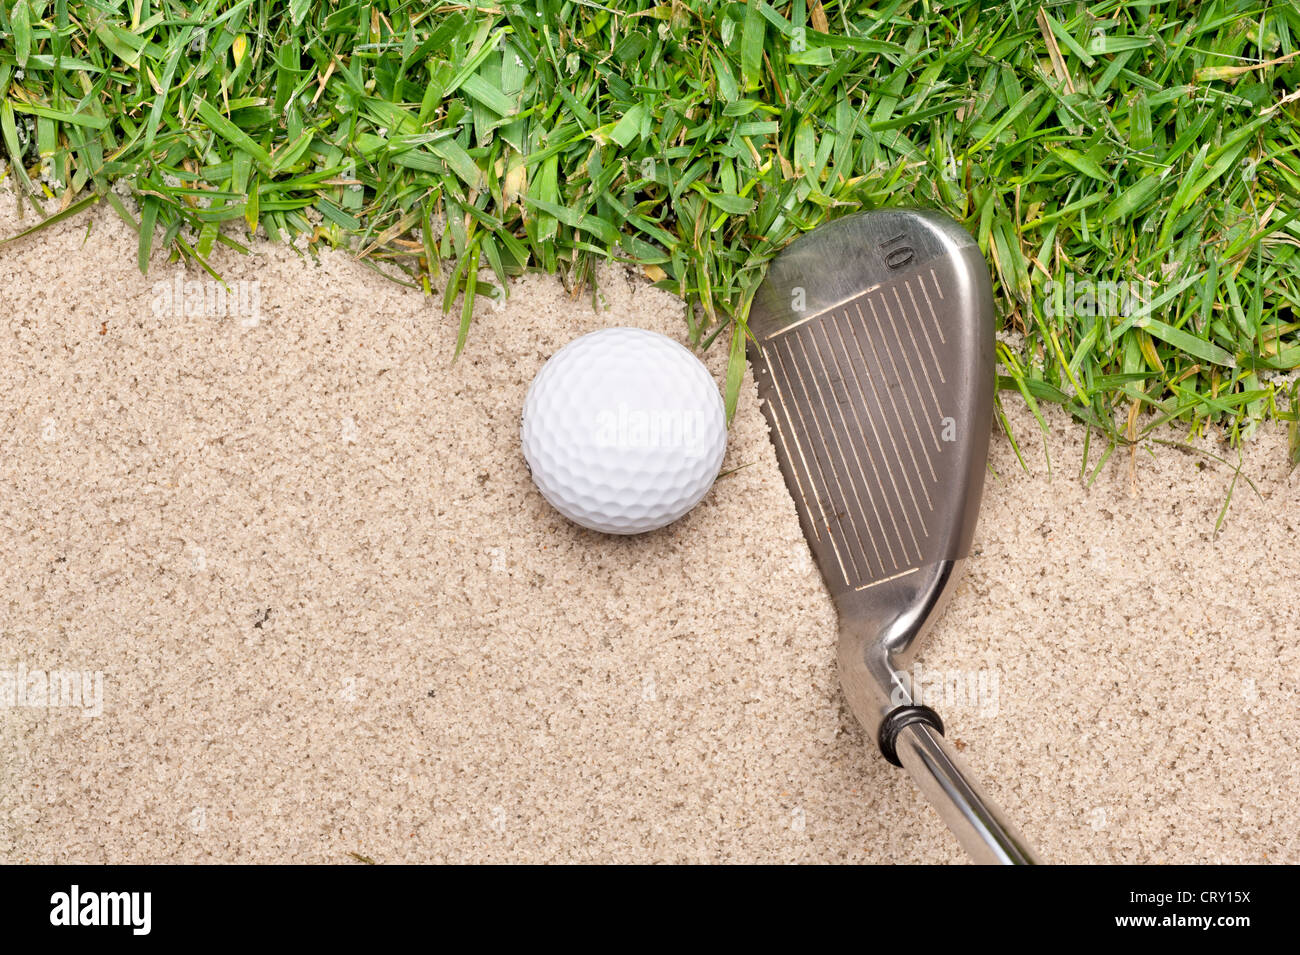 A golf ball in a sand trap getting ready to be hit with an iron Stock Photo  - Alamy